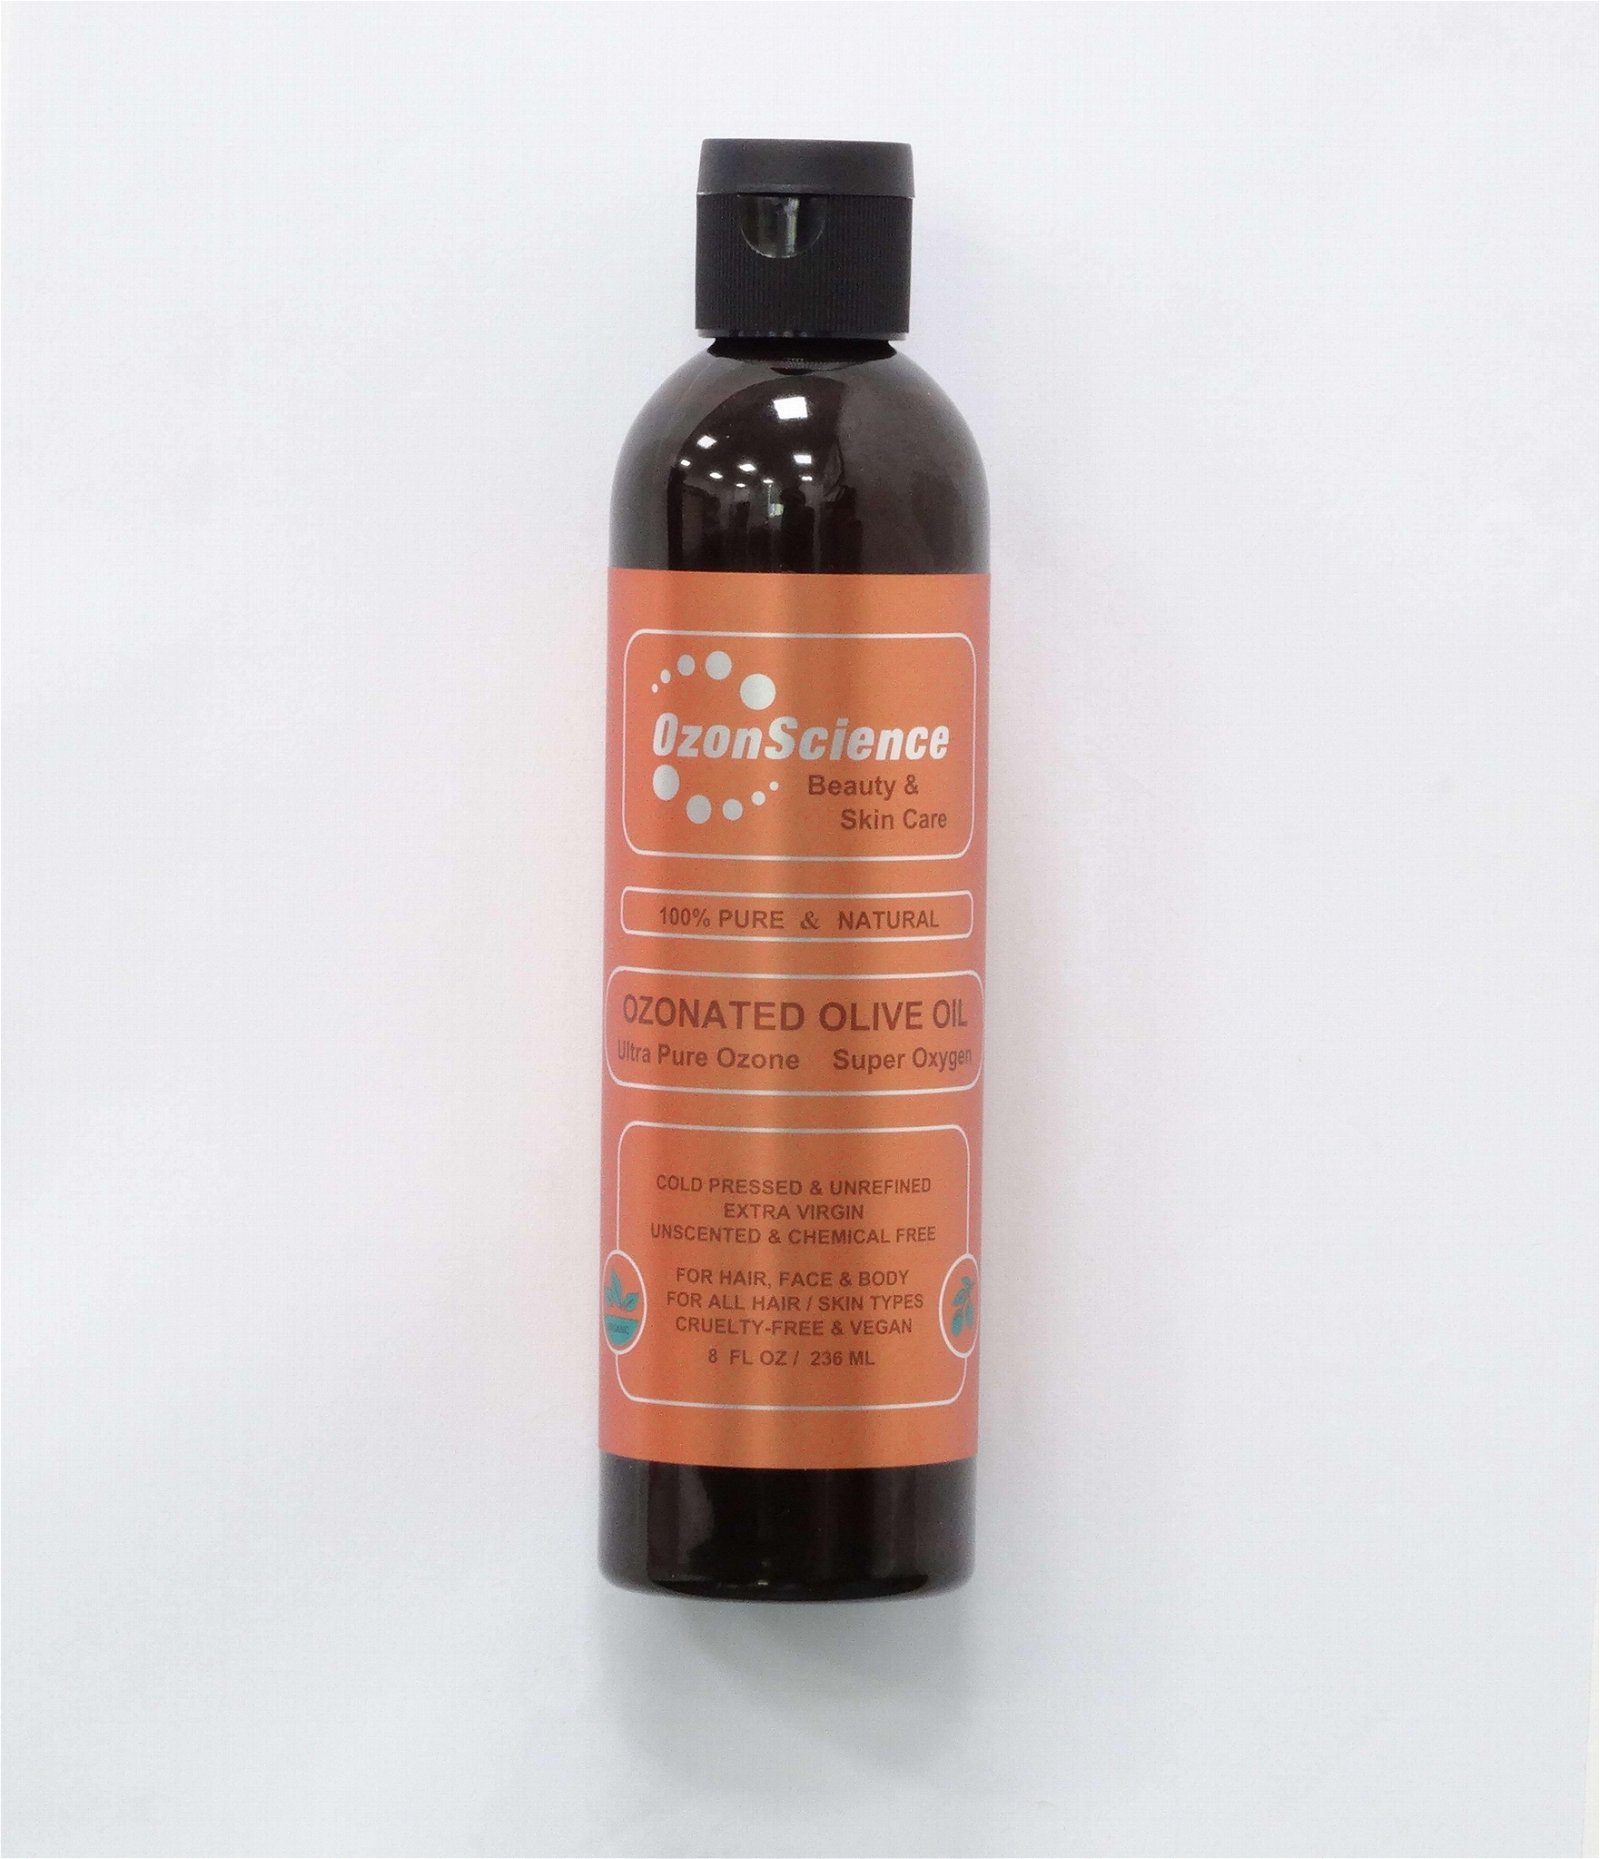 OzonScience Ozonated Olive Oil for Massage, Pure Ozone / Super Oxygen enriched